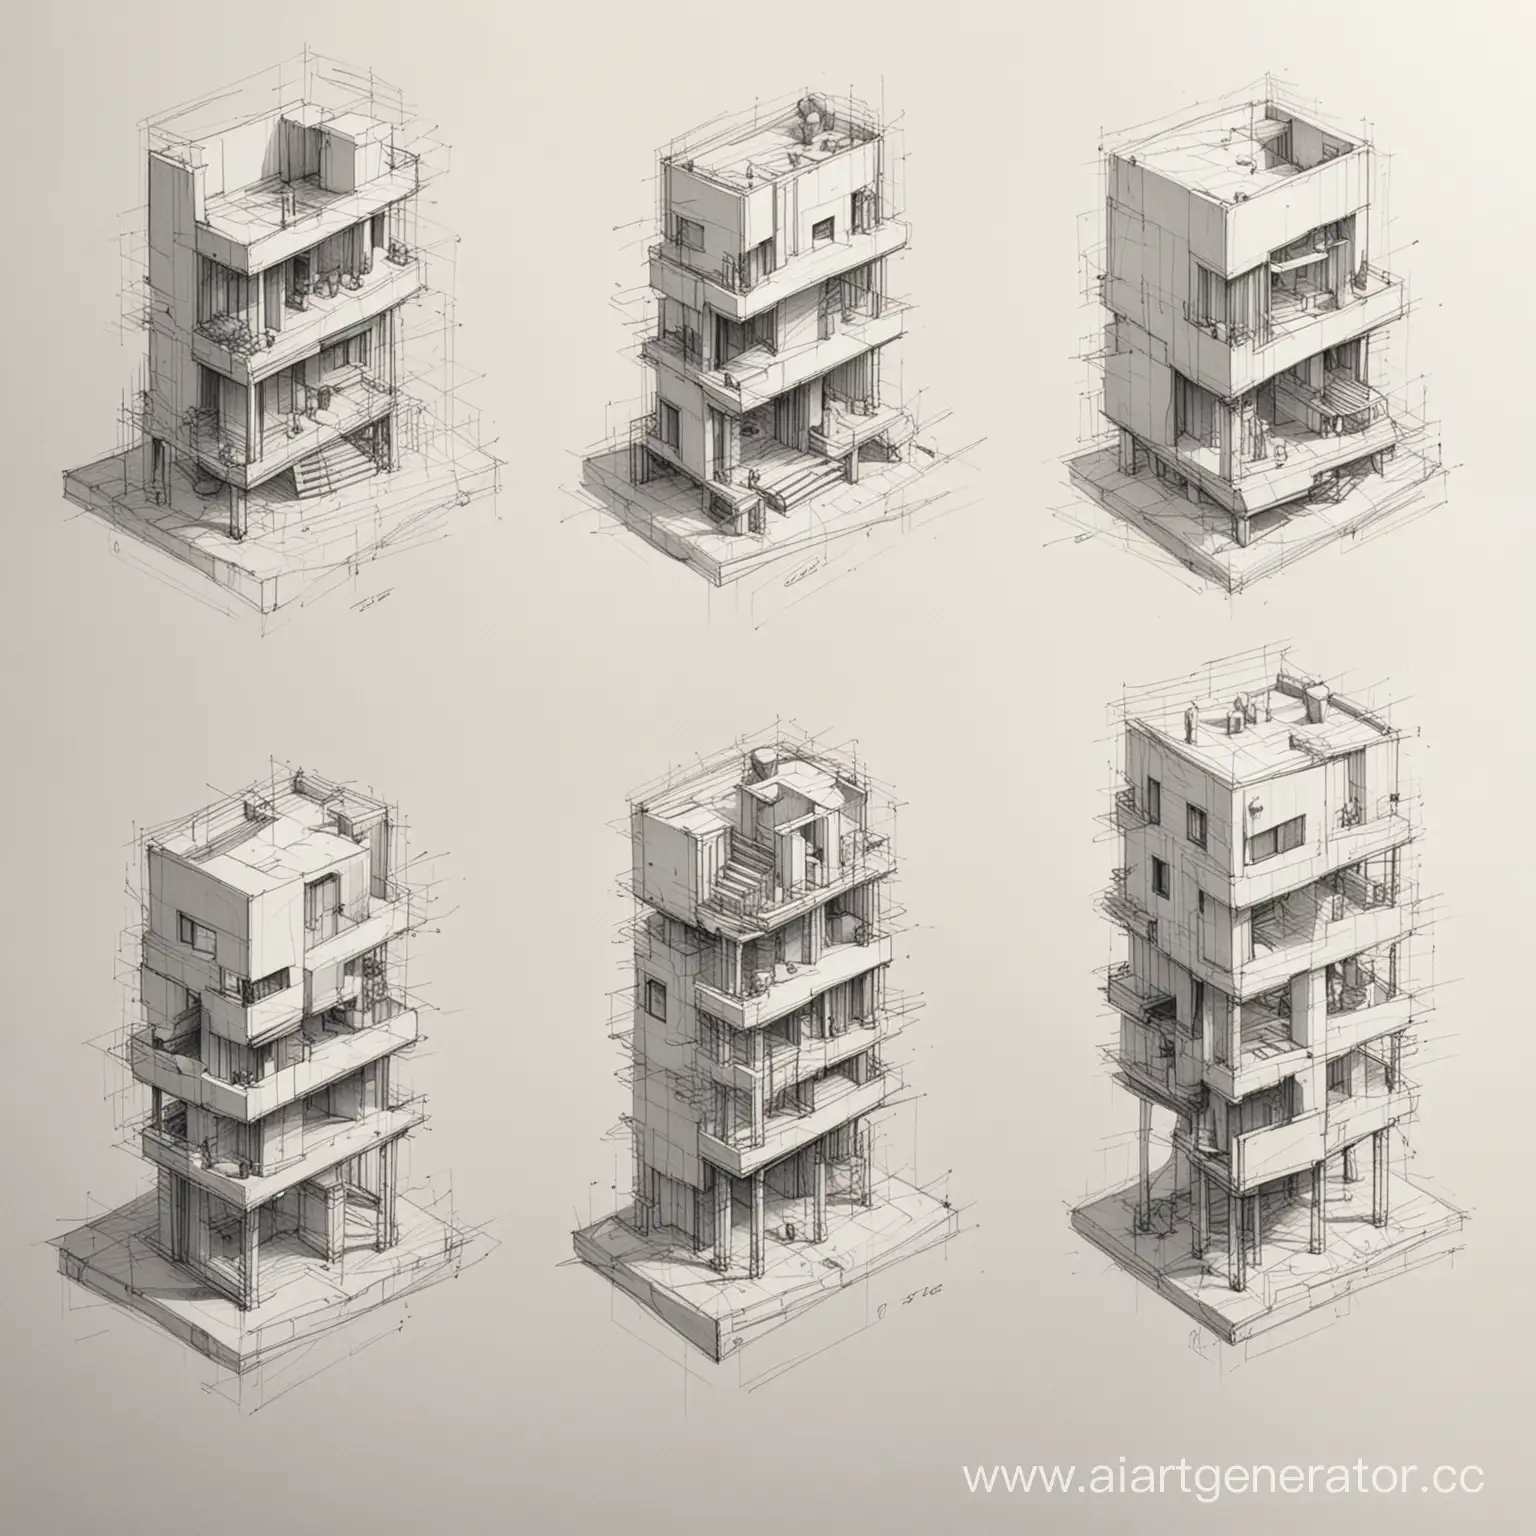 Sketches-of-Three-Architectural-Solutions-Plan-Facade-and-Axonometric-Views